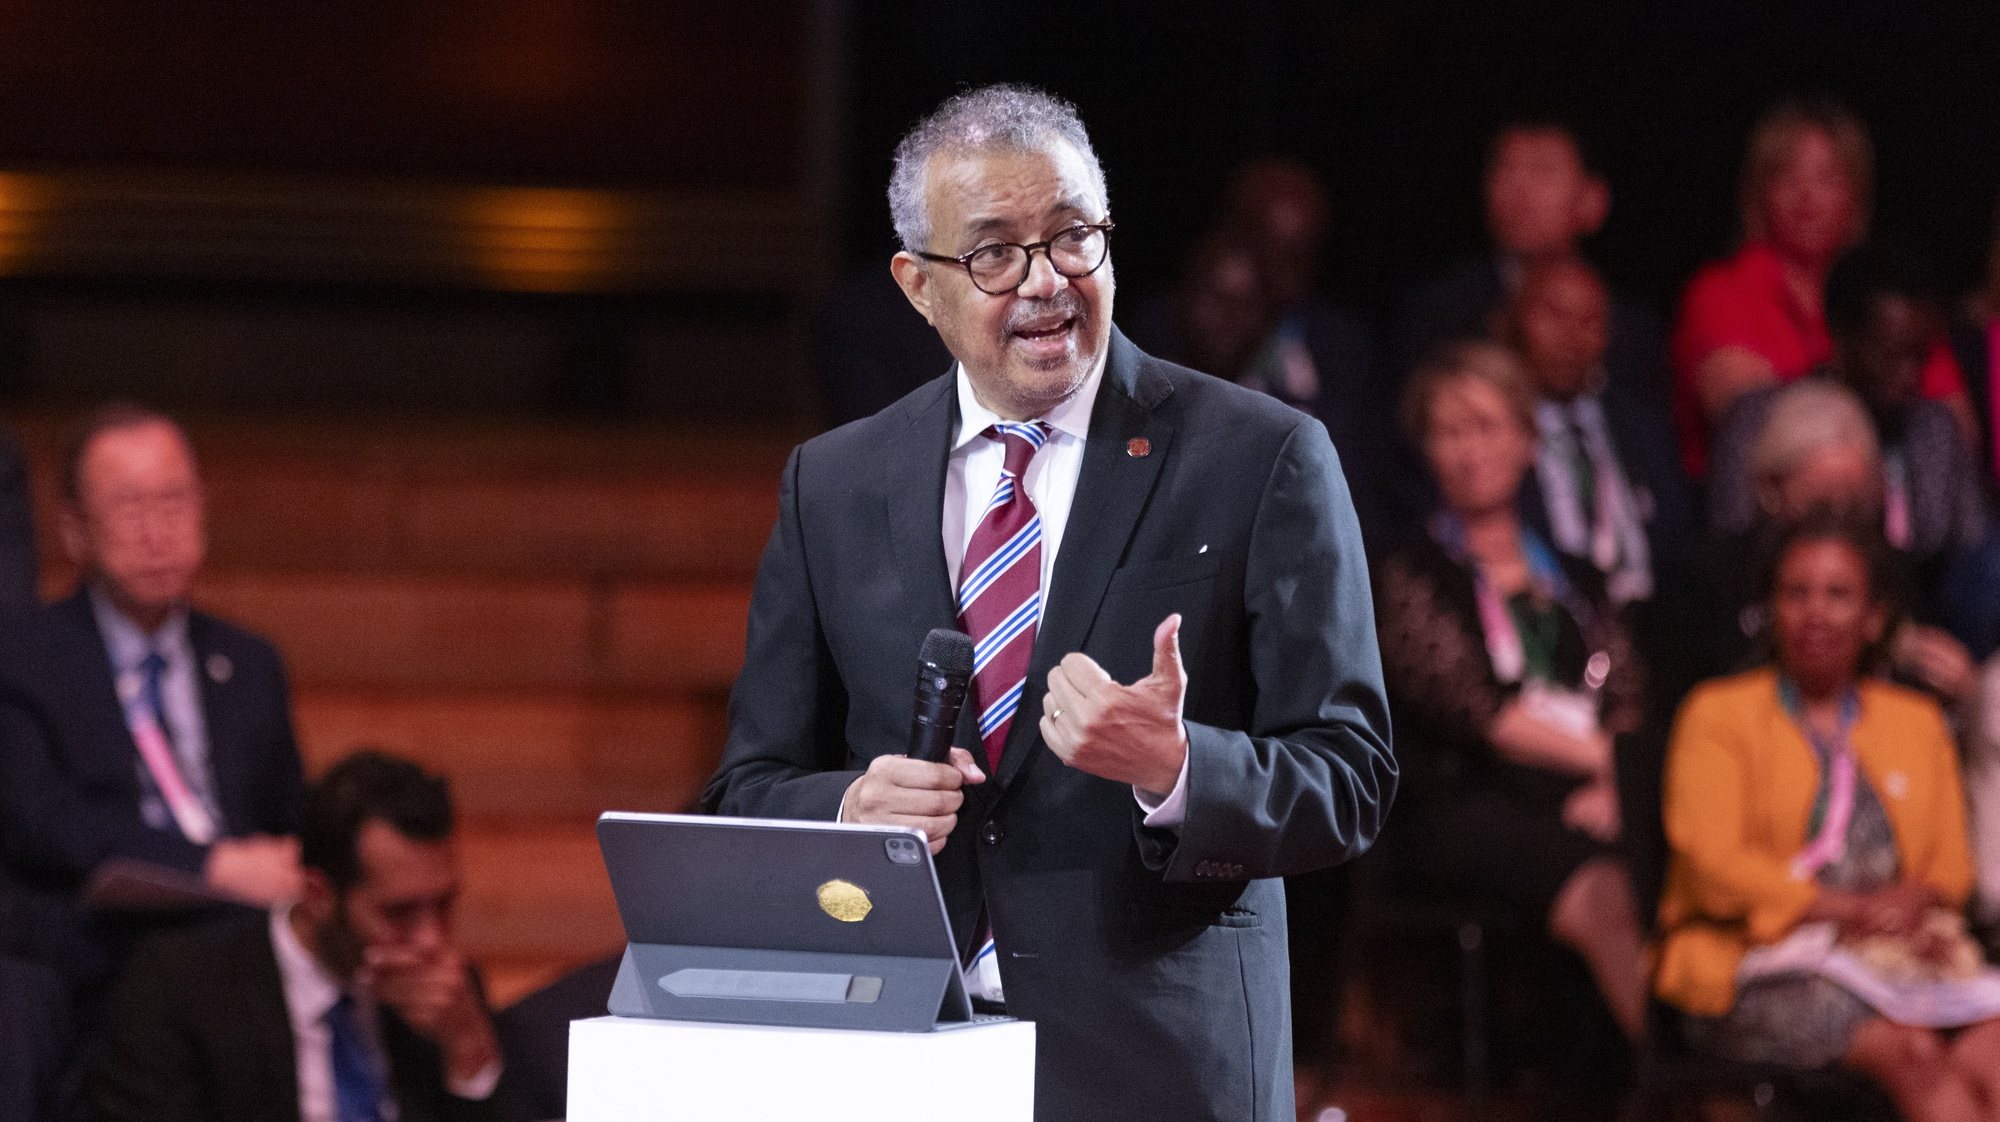 epa11496058 Tedros Adhanom Ghebreyesus, Director General of the World Health Organization (WHO), addresses the Sport for Sustainable Development Summit ahead of the Paris Olympic games, at the Carroussel du Louvre in Paris, France, 25 July 2024. The Summit aims to mobilize the public and private sectors around the values of sport and financing for development, and to support the Paris Agreement on Sport and Sustainable Development, which consists of 10 commitments.  EPA/ANDRE PAIN / POOL